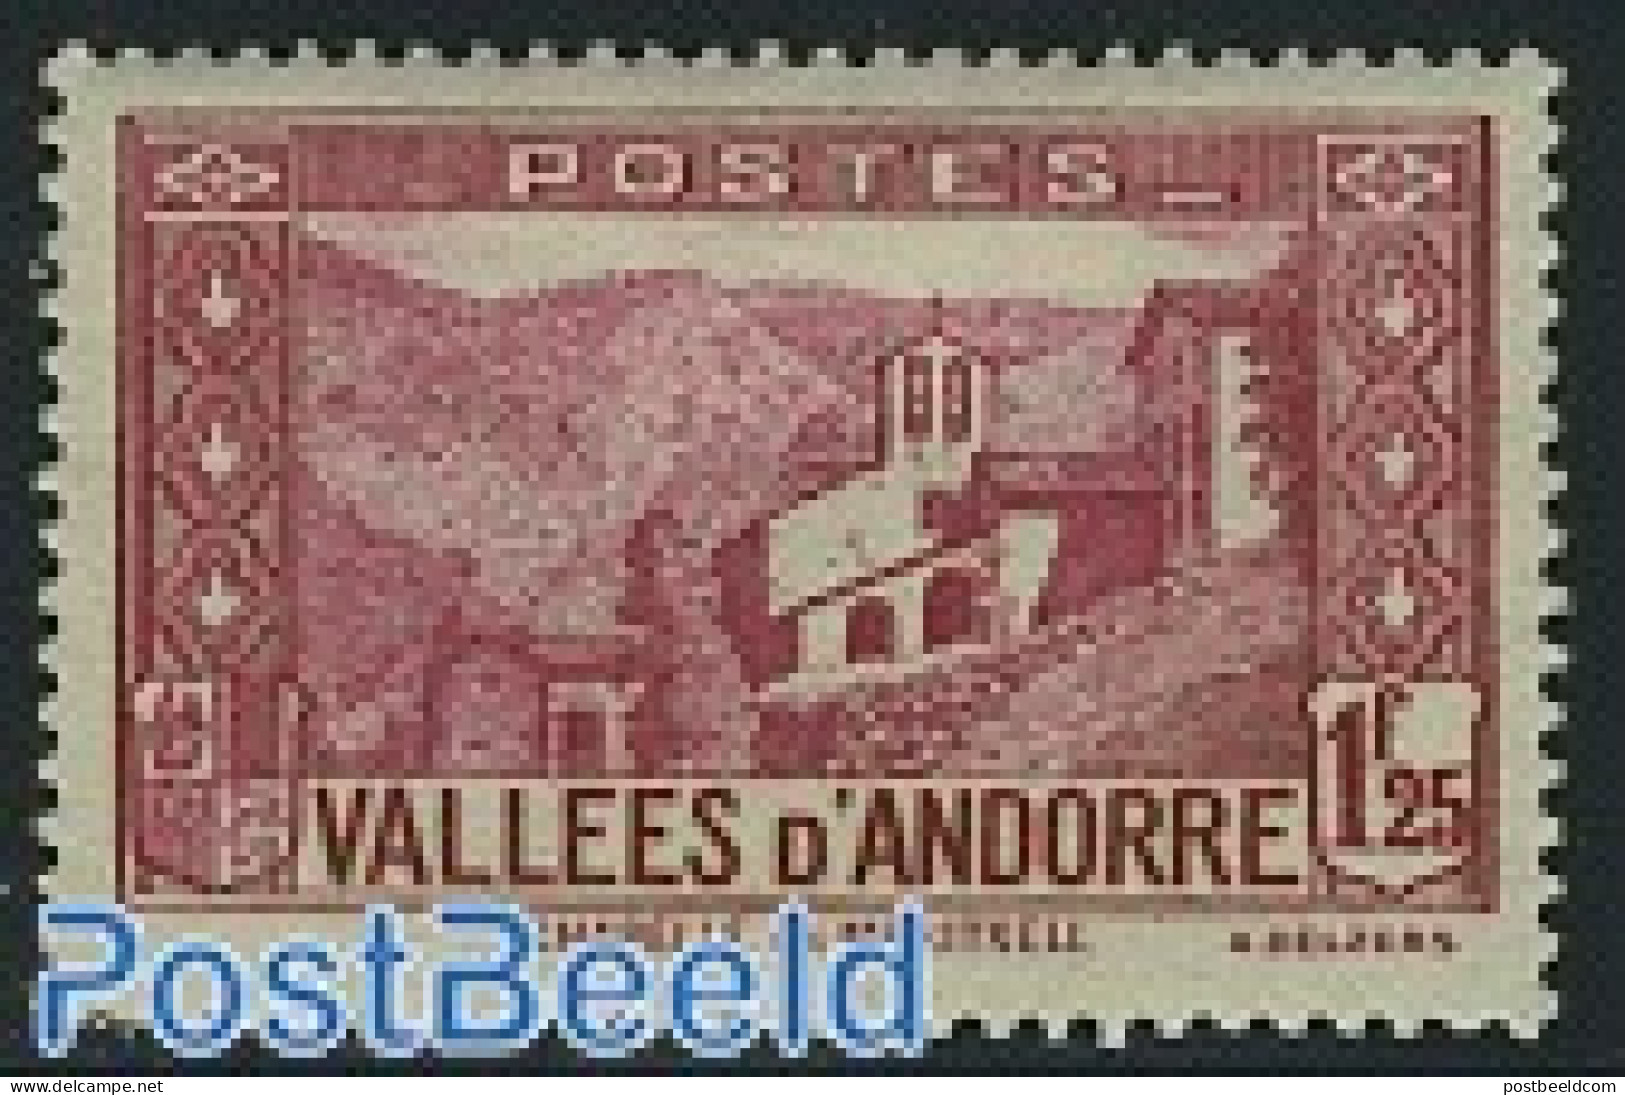 Andorra, French Post 1933 1.25F, Stamp Out Of Set, Unused (hinged), Religion - Churches, Temples, Mosques, Synagogues - Neufs